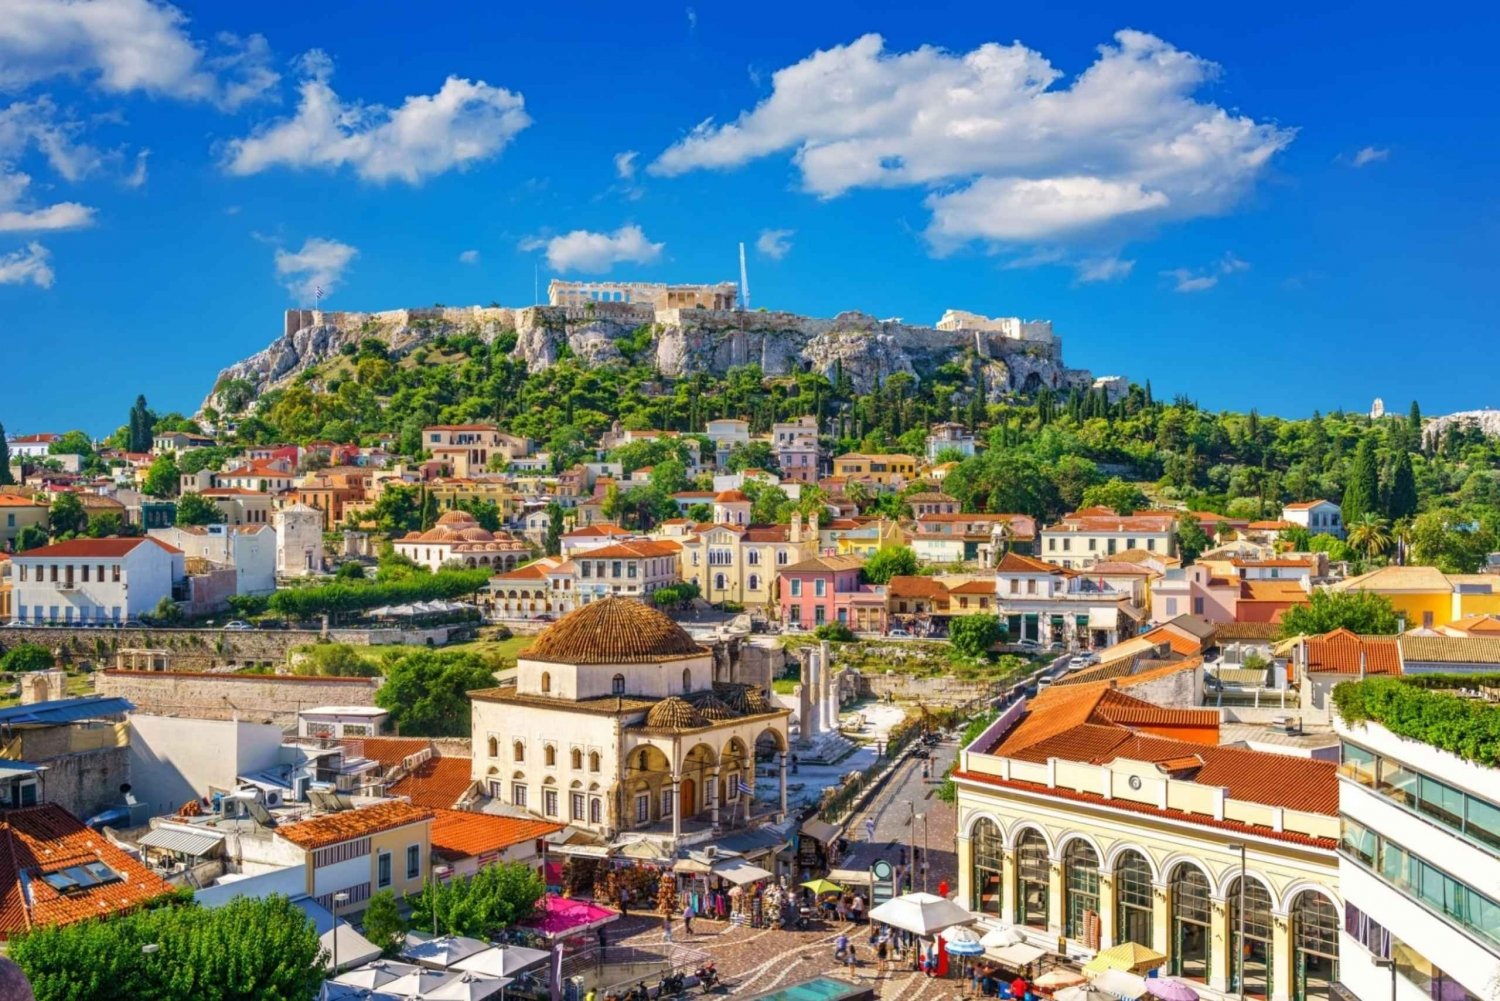 Acropolis Combo Ticket (7 sites included)